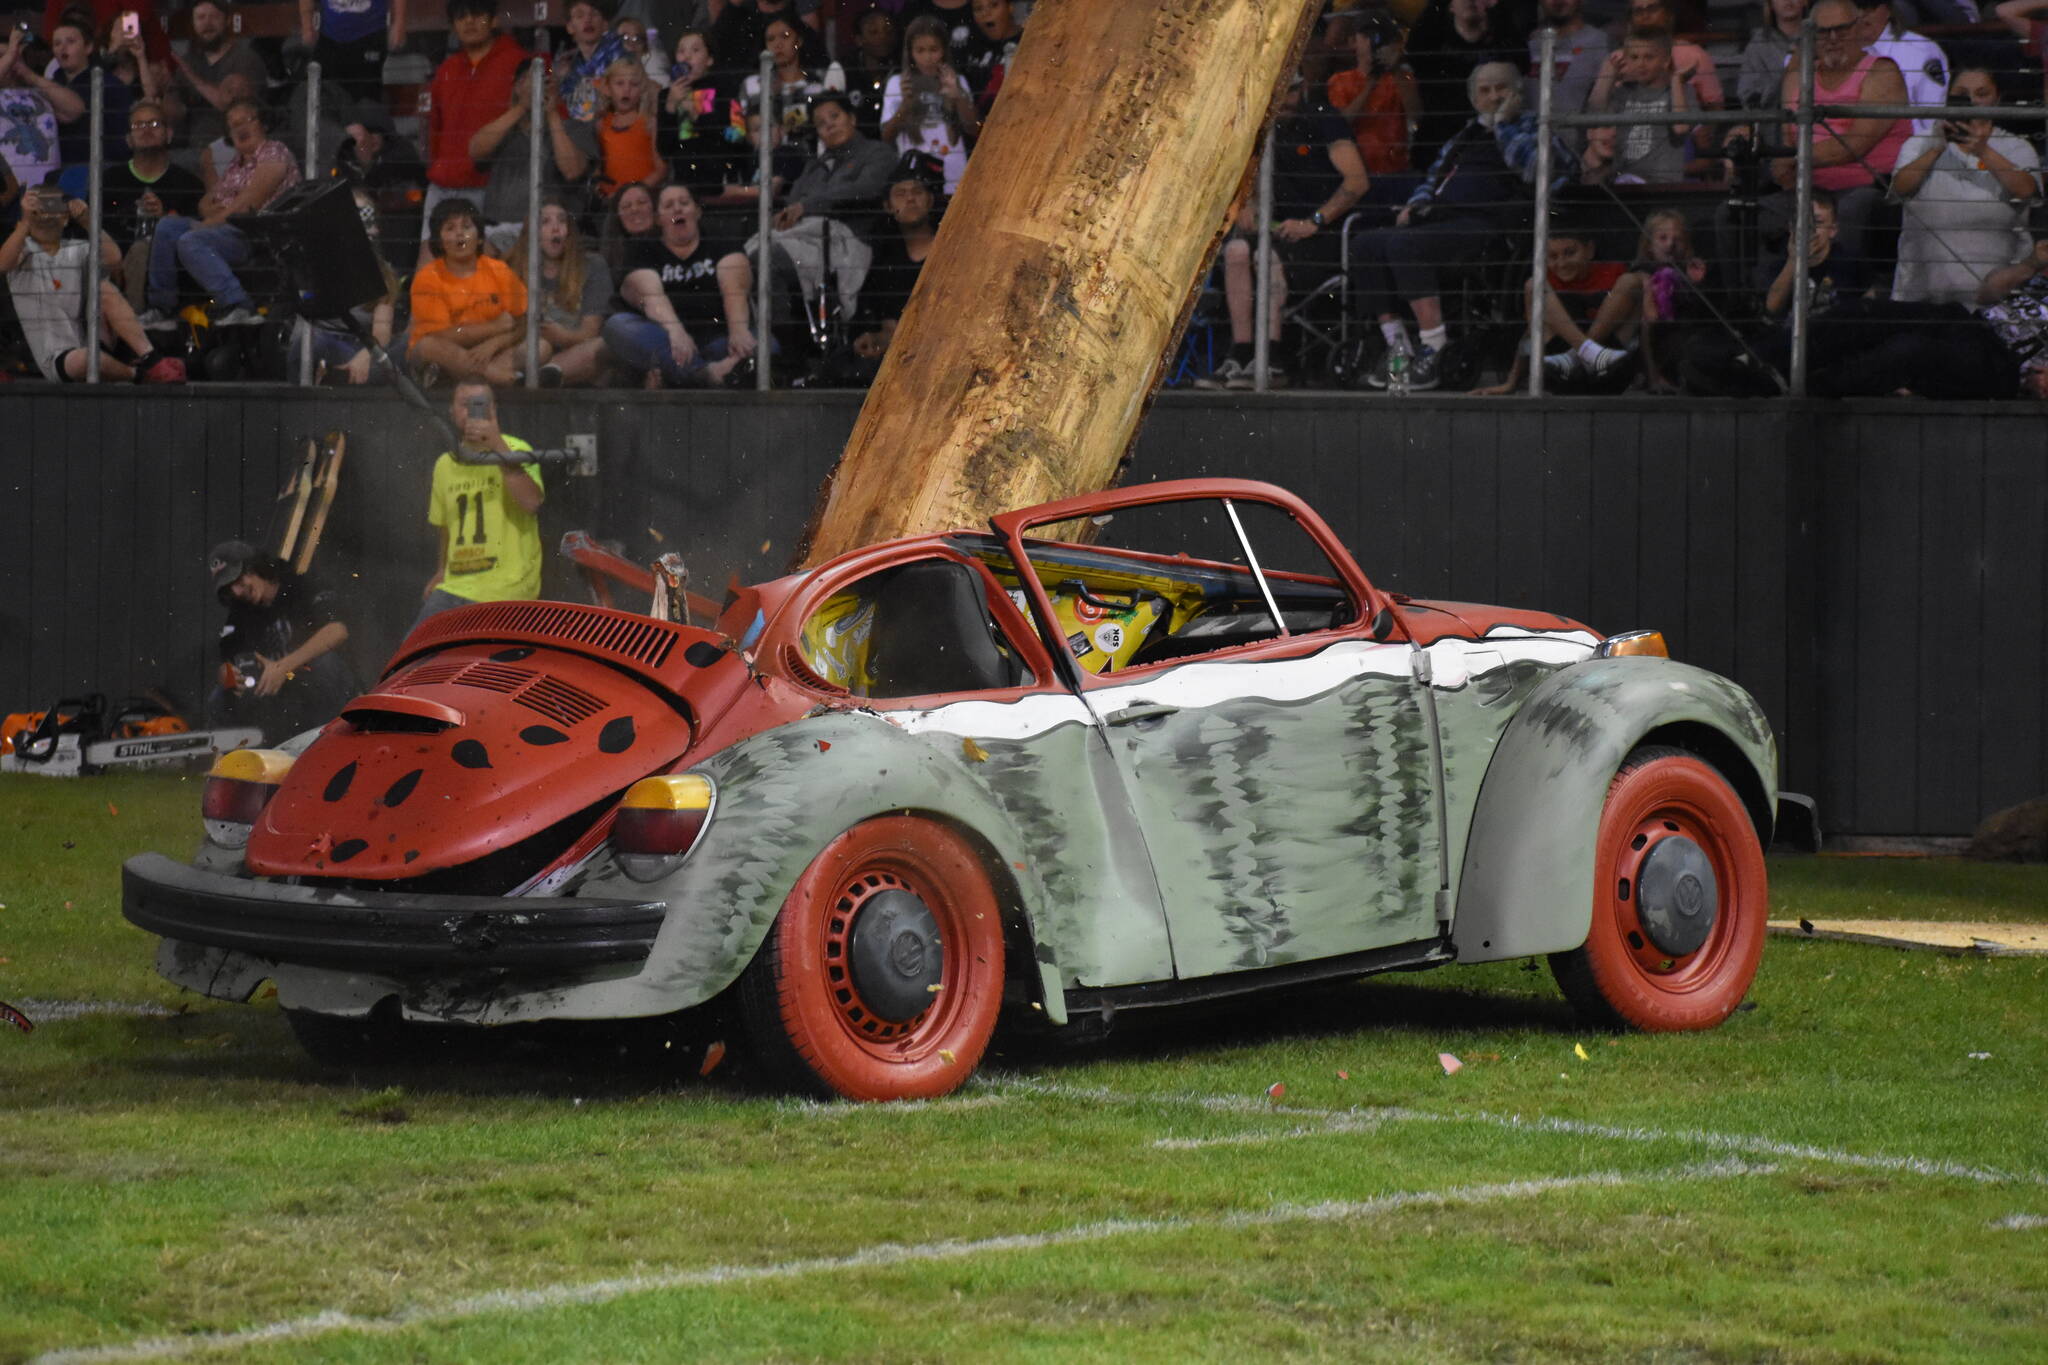 Thousands of people were reminded of the destruction a massive timber log can do to a car as Ed “Mooch” Smith expertly cut into a Douglas fir from inside Olympic Stadium in Hoquiam. Smith’s precision cuts resulted in the piece of timber falling squarely through the hood of an old Volkswagen Beetle, which was painted to look like a watermelon.